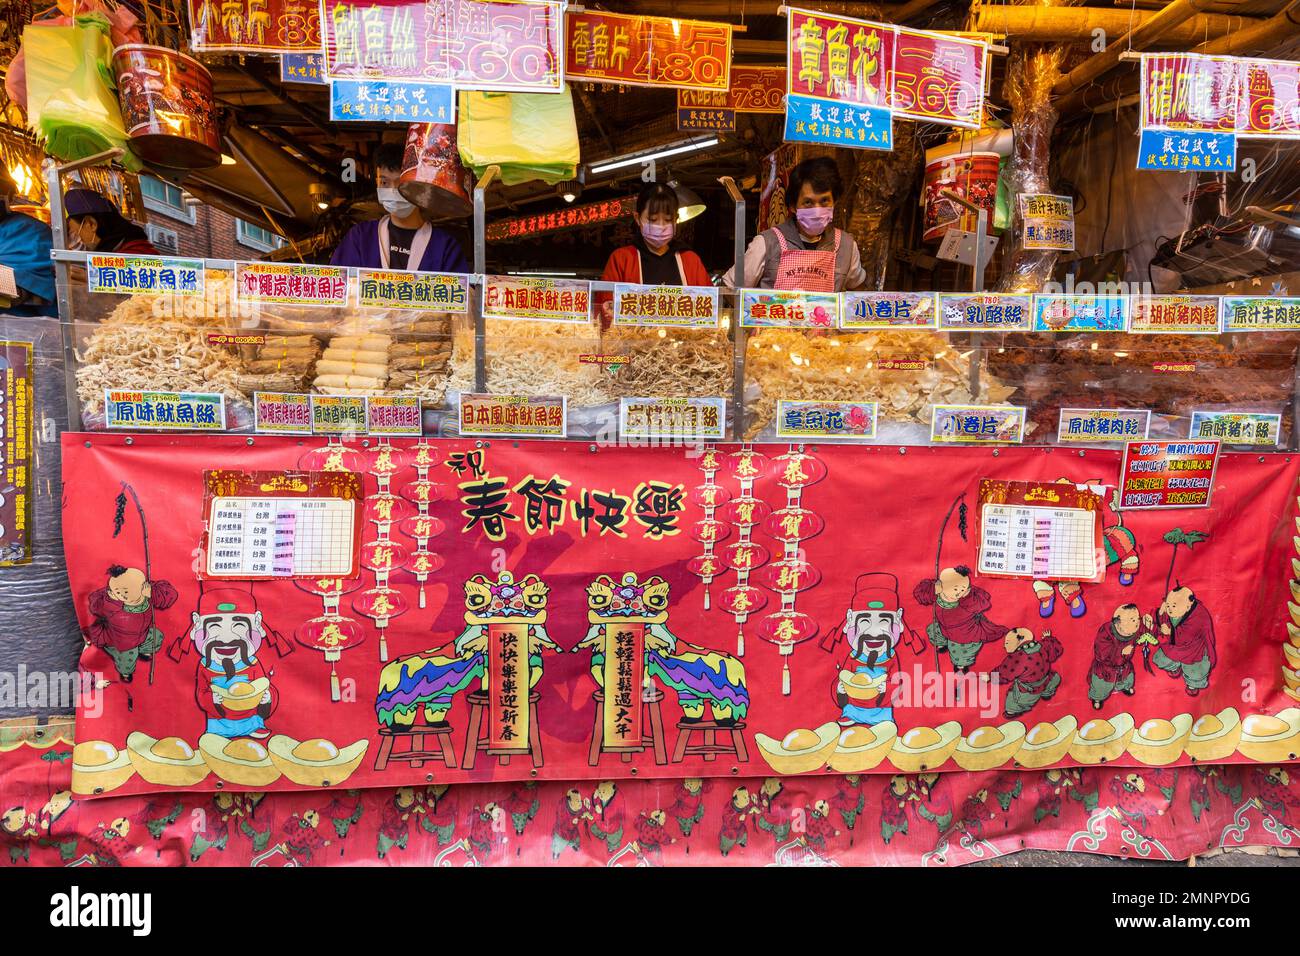 Stall at Dihua St New Year market in Taipei selling various preparations of squid and dried pork. Stock Photo